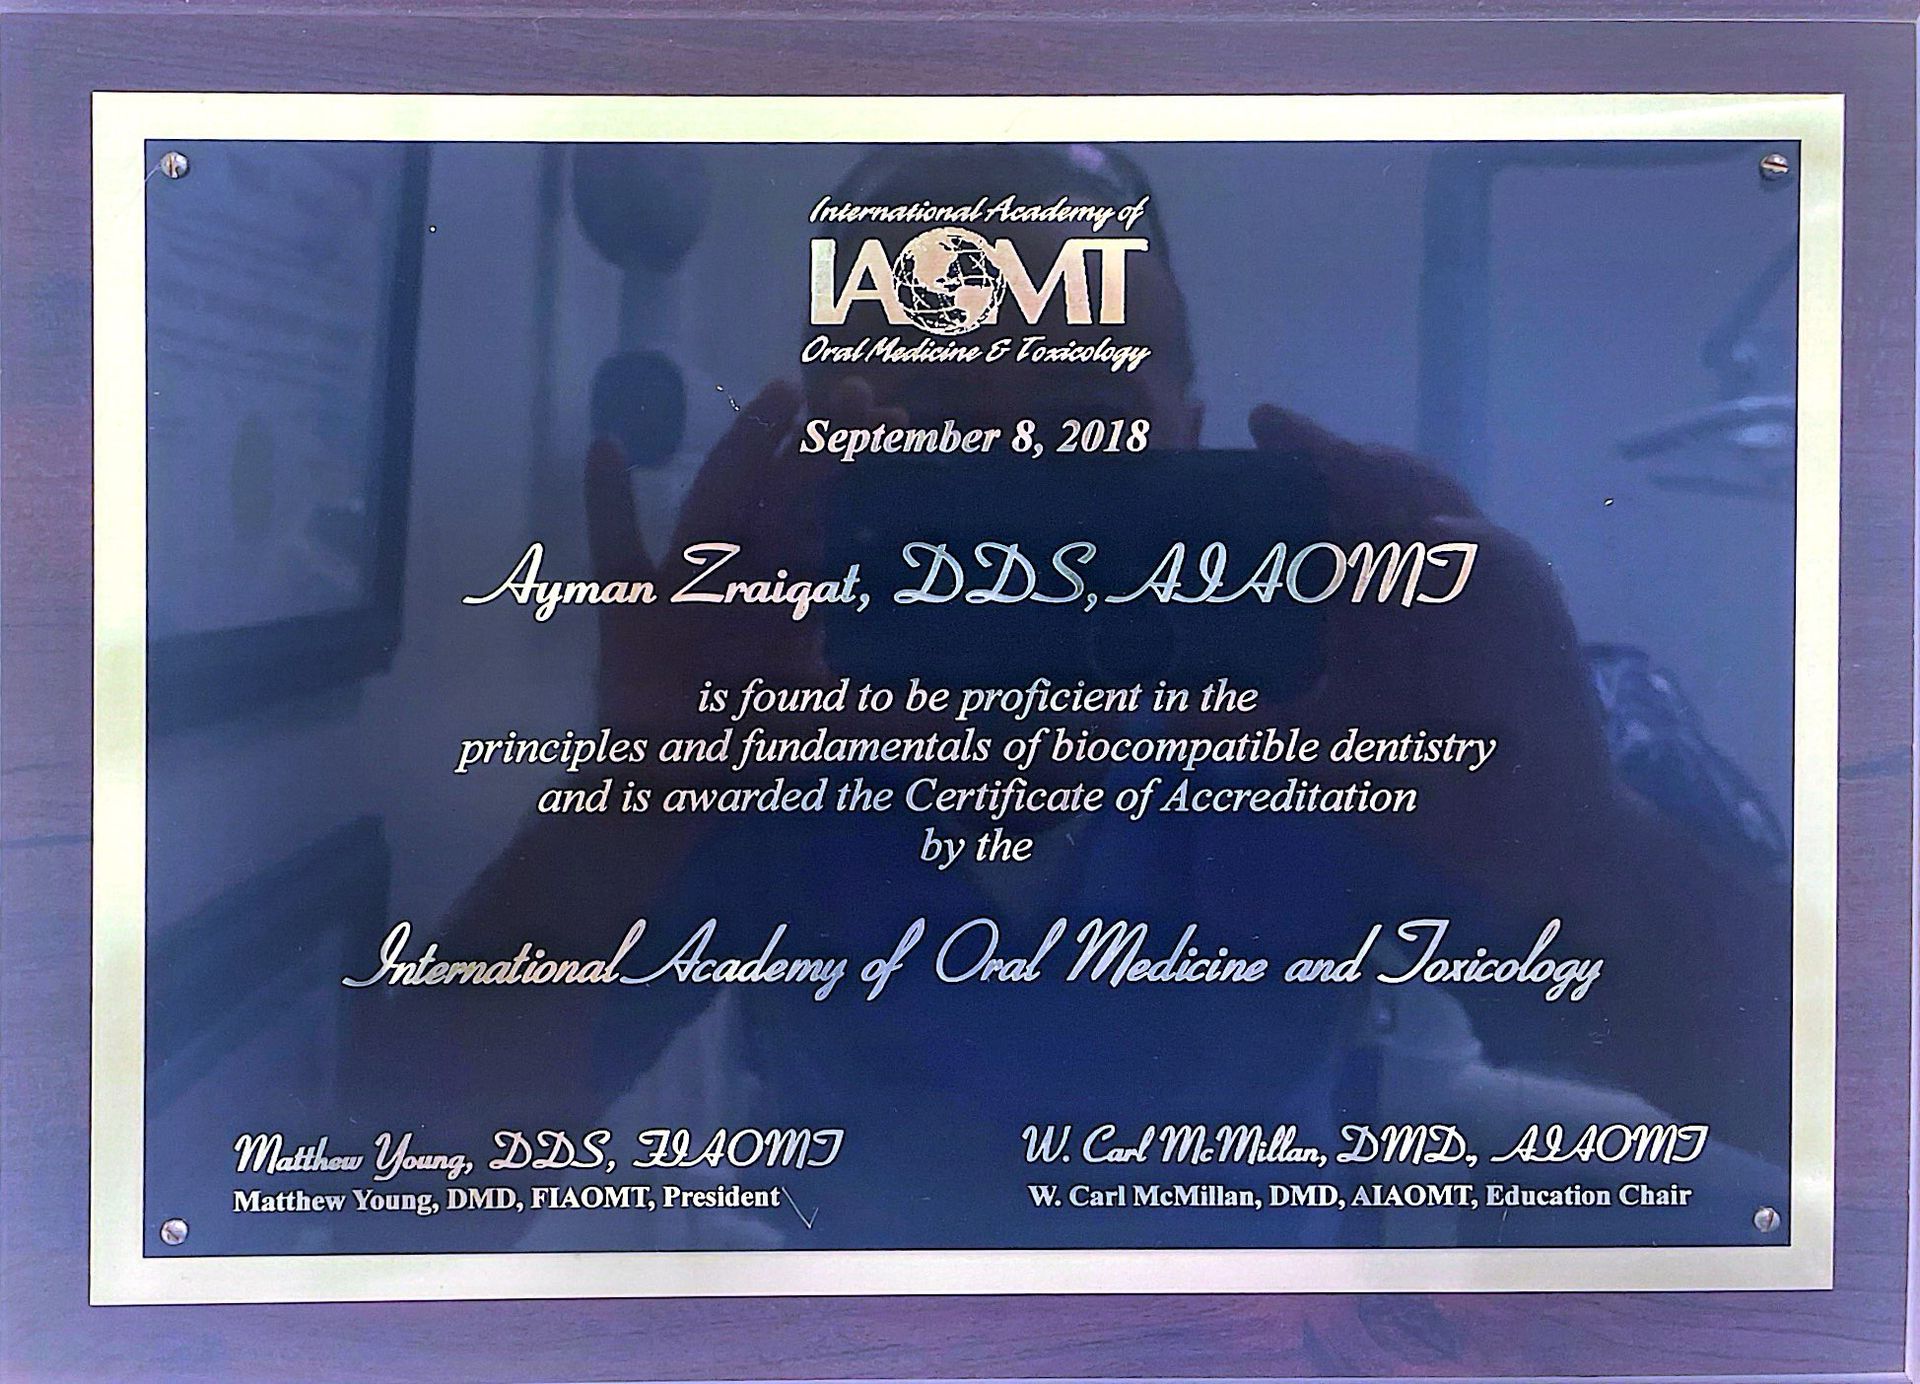 A plaque certifying Ayman Zraigat for proficiency in biocompatible dentistry, awarded by the International Academy of Oral Medicine and Toxicology.